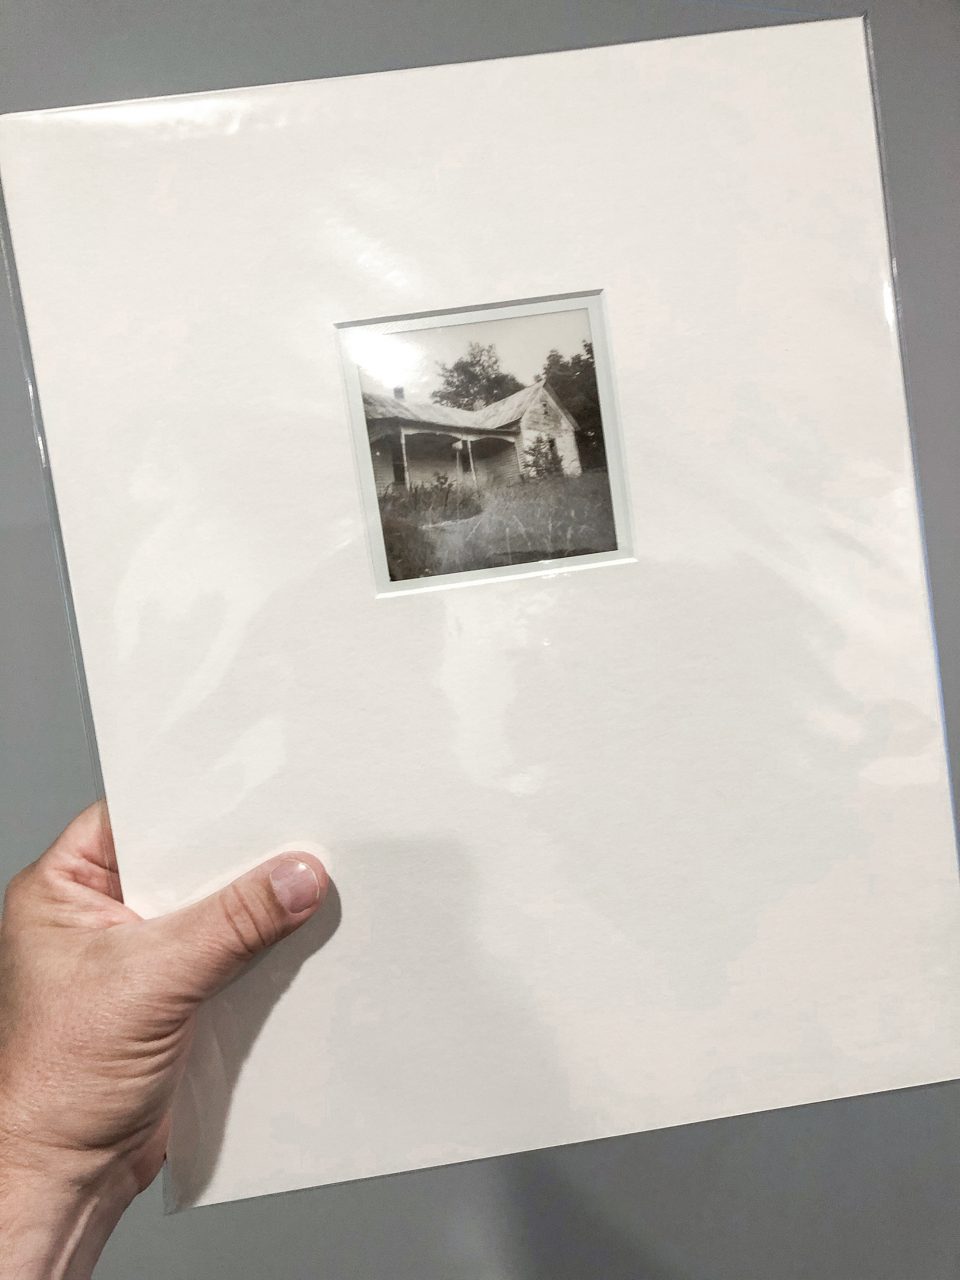 A look at the matted print of the Hollow Rock farmhouse, which has since been demolished. The entire package is held in a protective plastic sleeve which can be removed before framing.